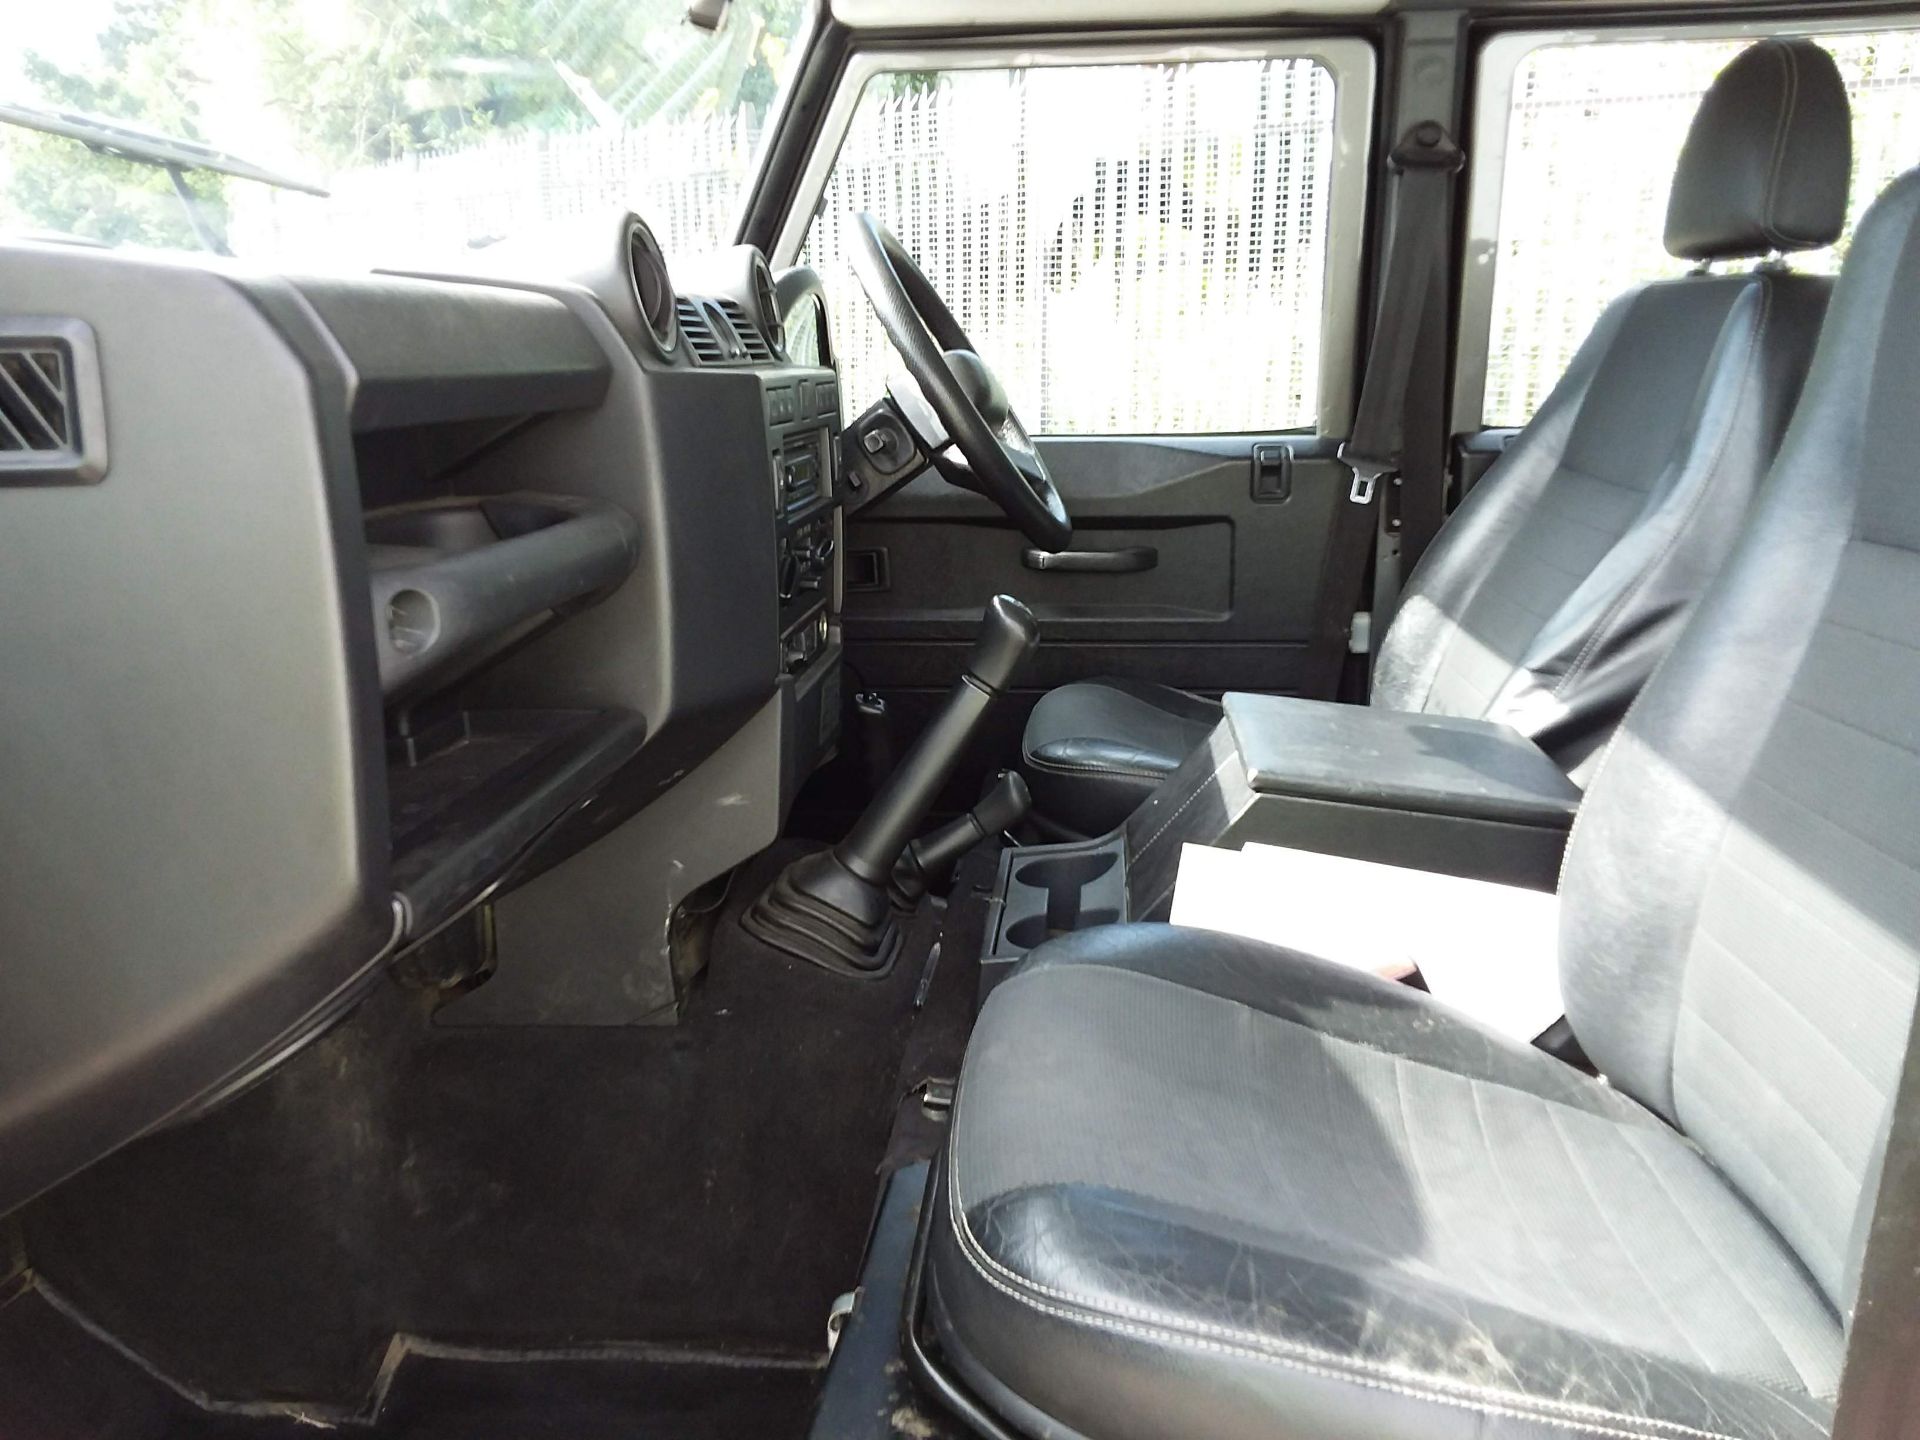 2008/08 REG LAND ROVER DEFENDER 110 XS LWB STATION WAGON 2.4 DIESEL, 7 SEATER, AIR CON *NO VAT* - Image 8 of 10